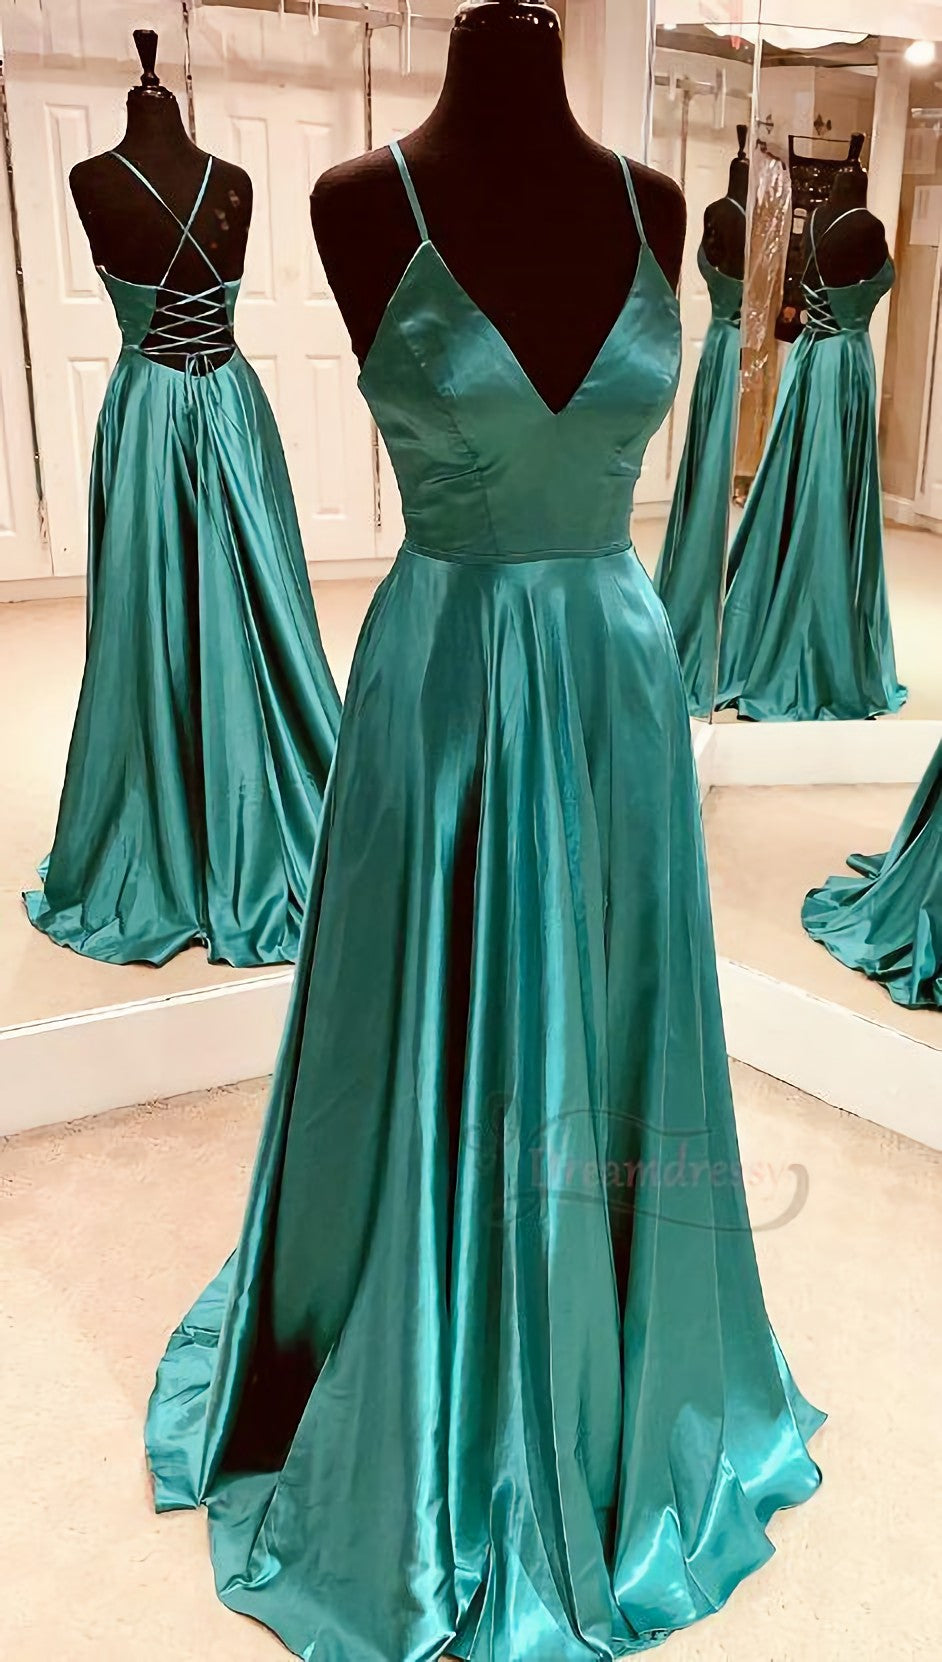 Prom Dress Floral, Simple A Line V Neck Teal Long Prom Dress, With Lace Up Back